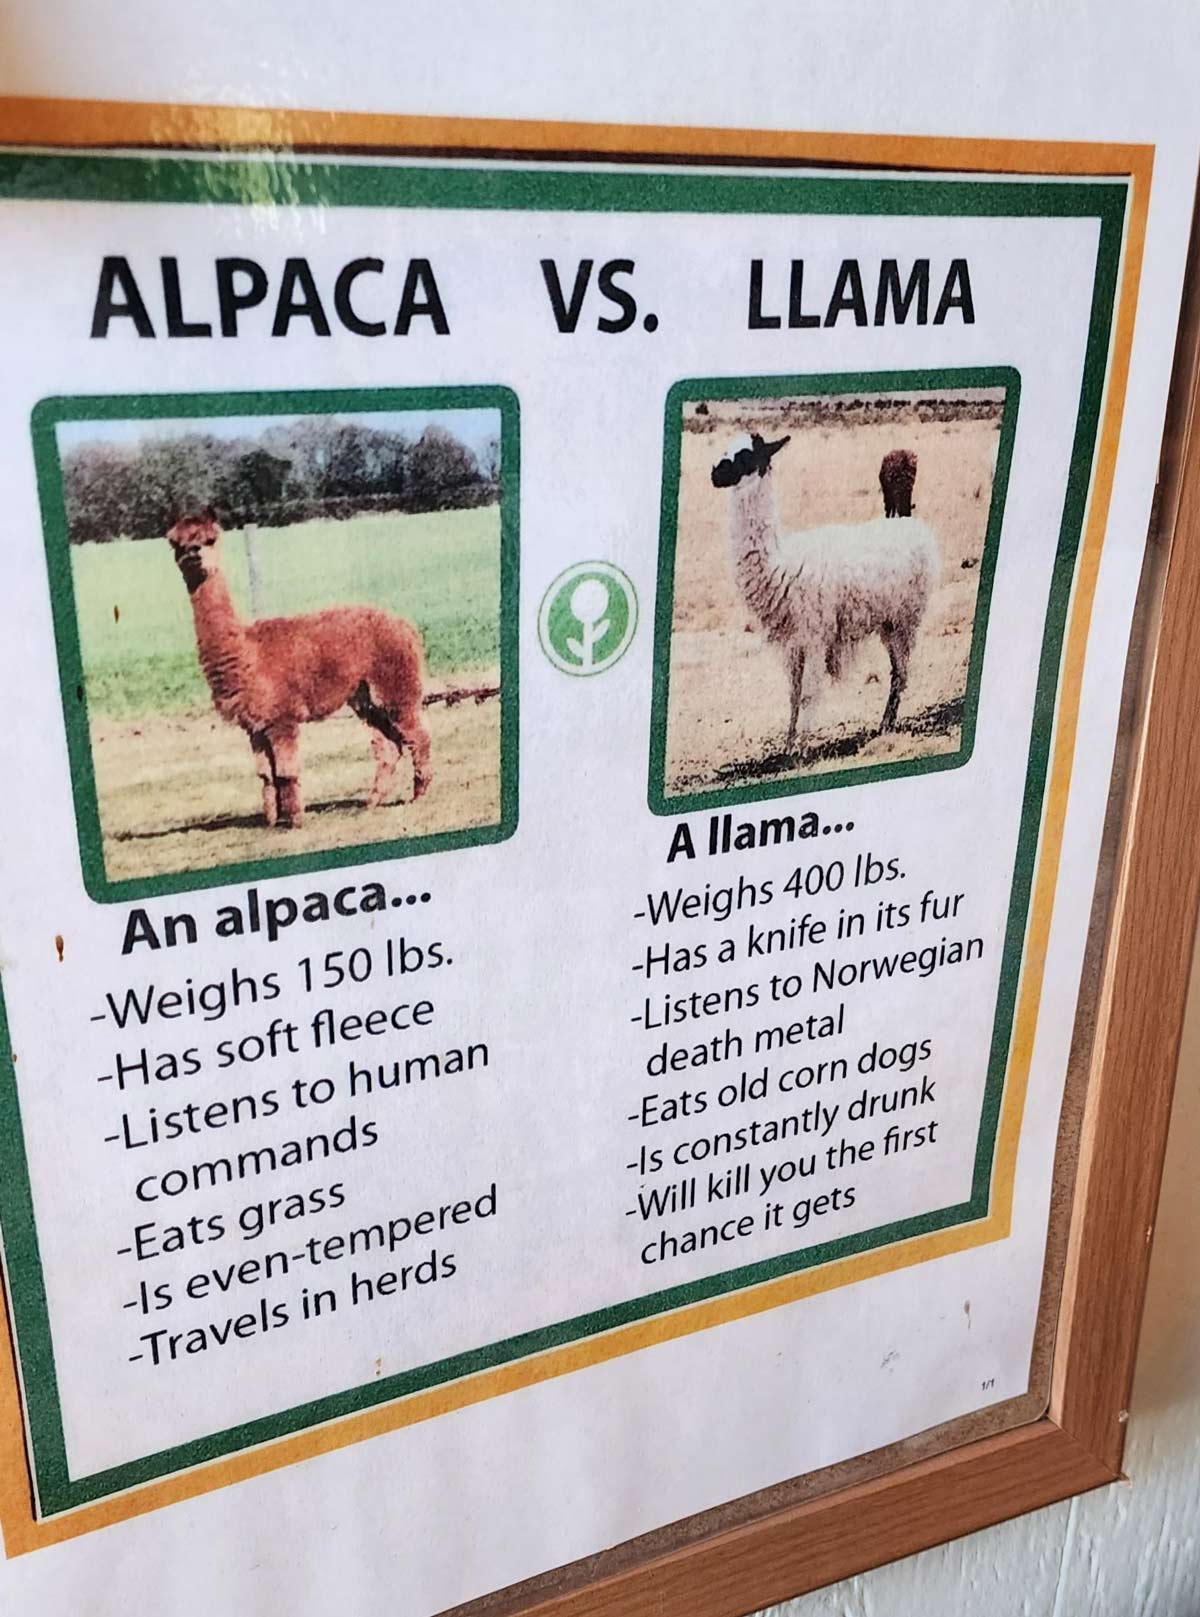 Went to an alpaca farm with the family. This was the highlight for me